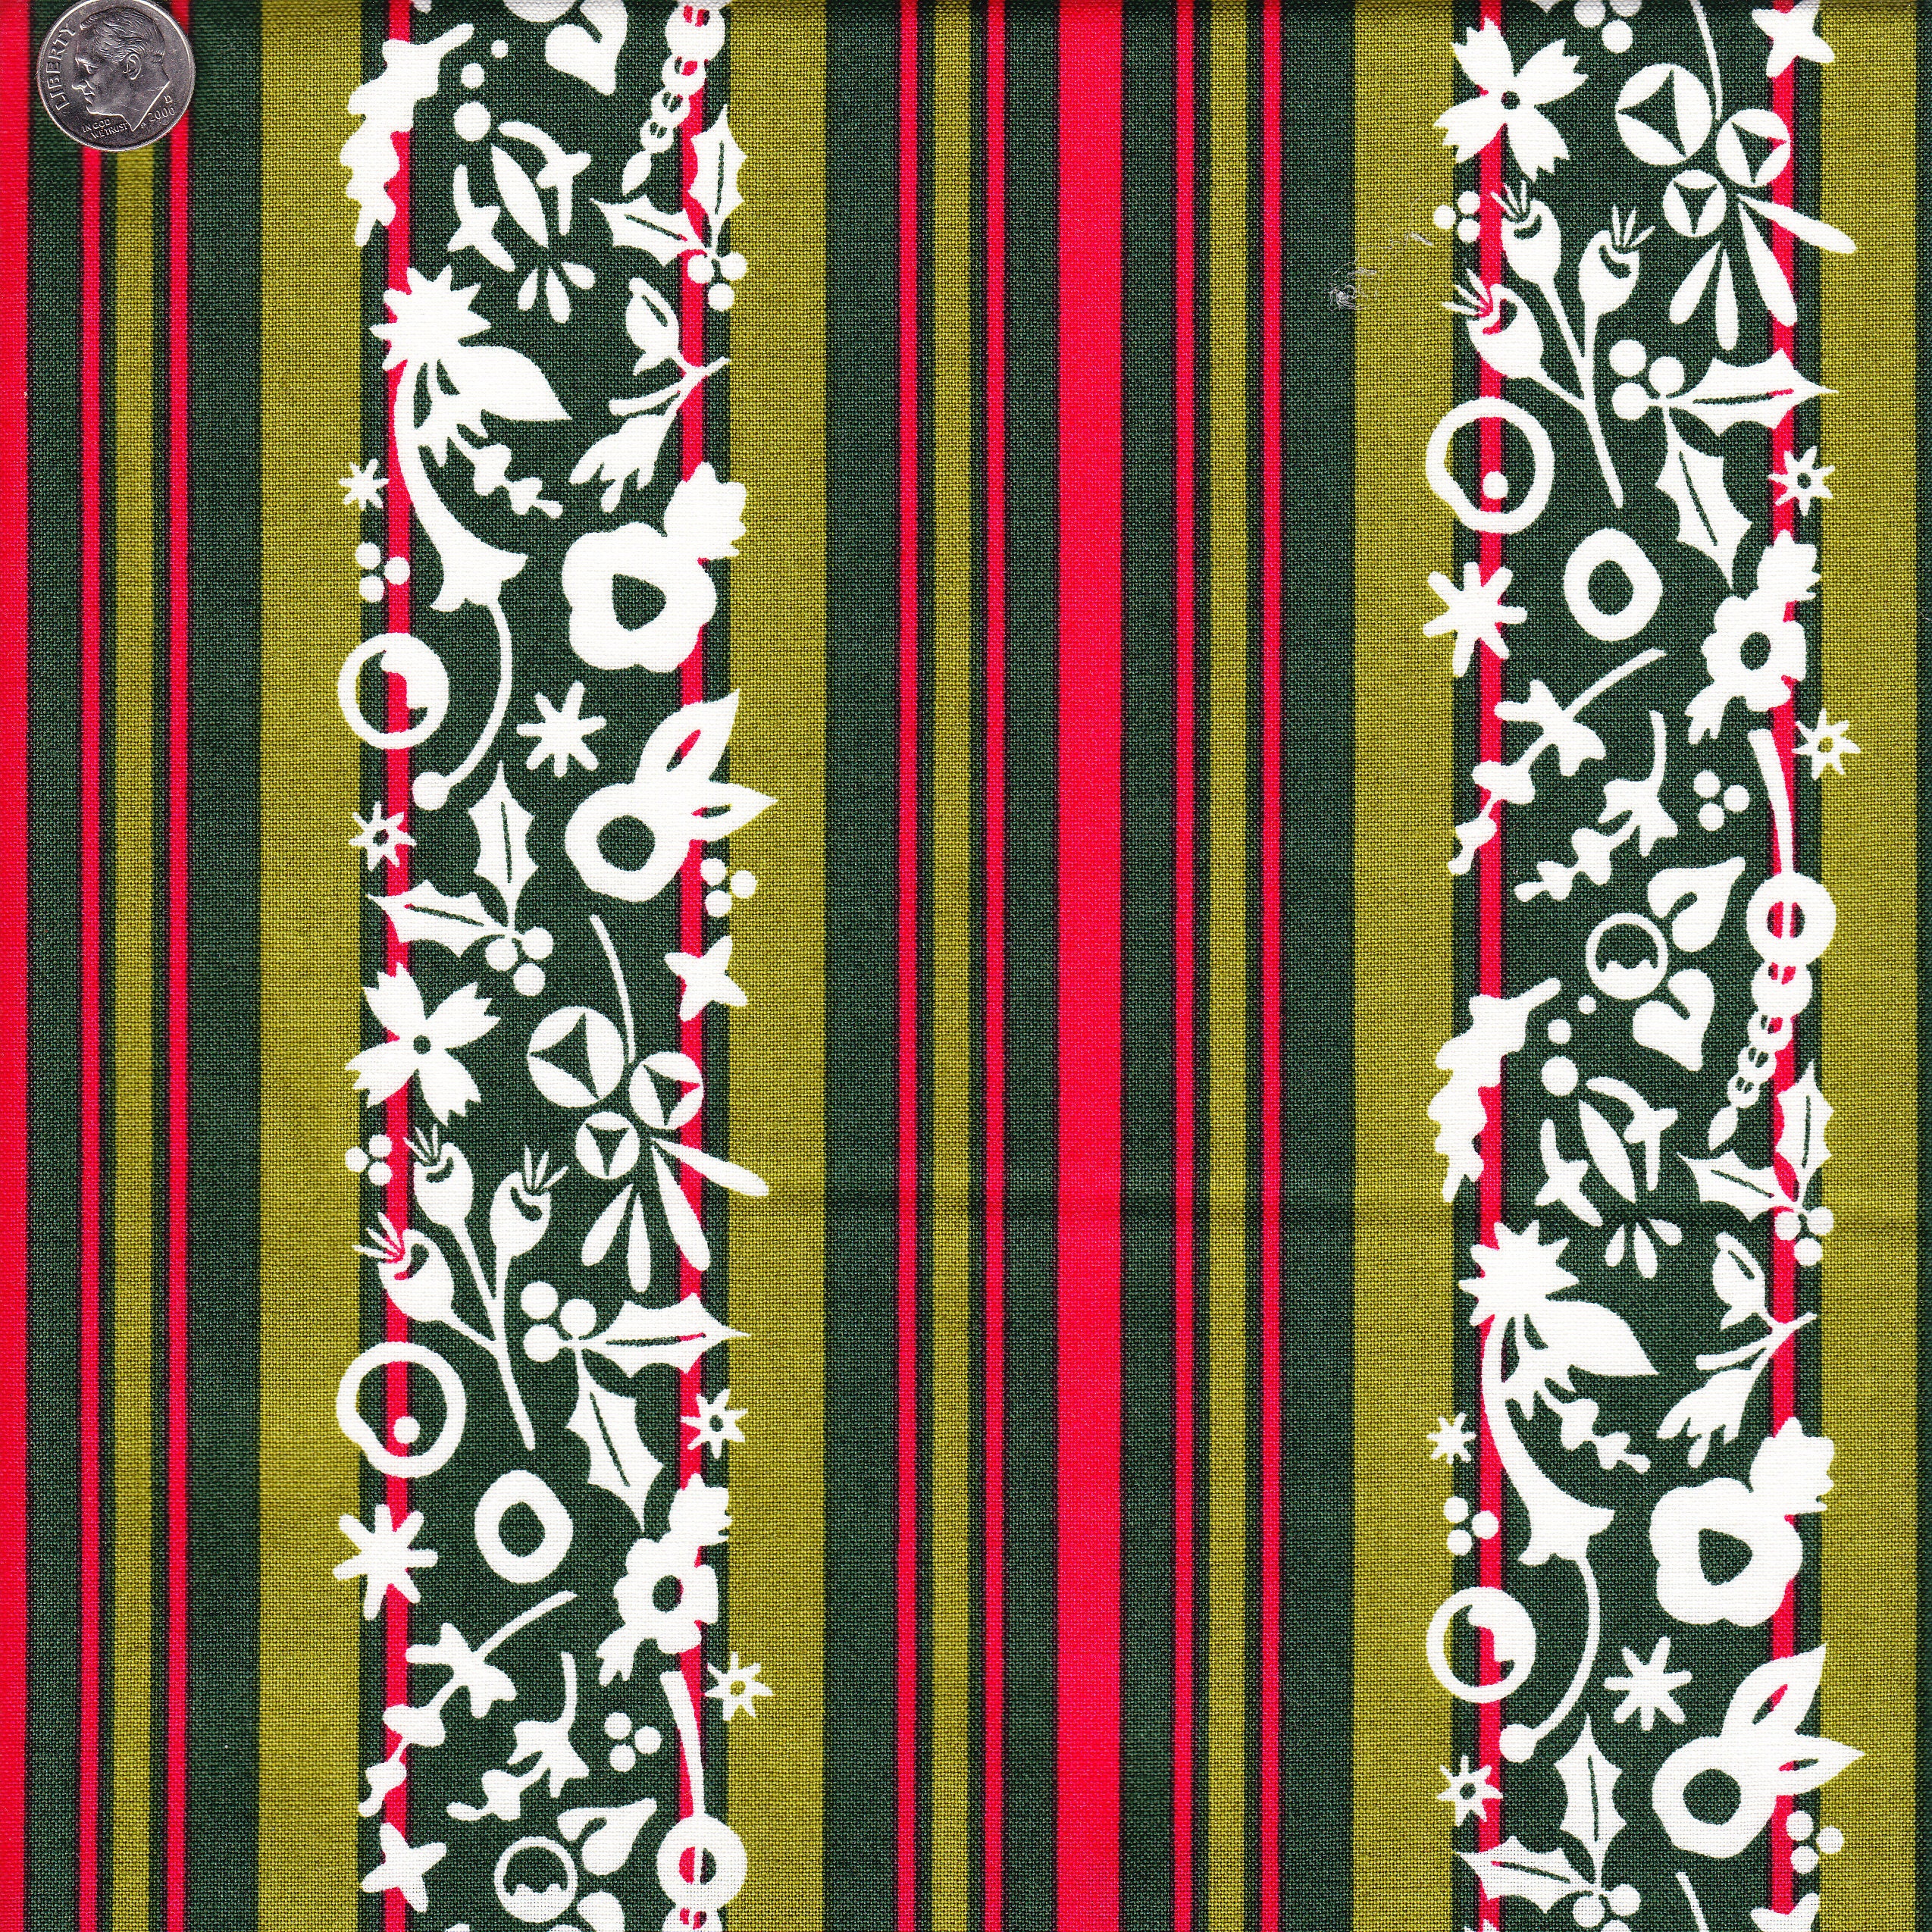 Sold by the Half Yard Alison Glass Holiday Stripe in photo picture